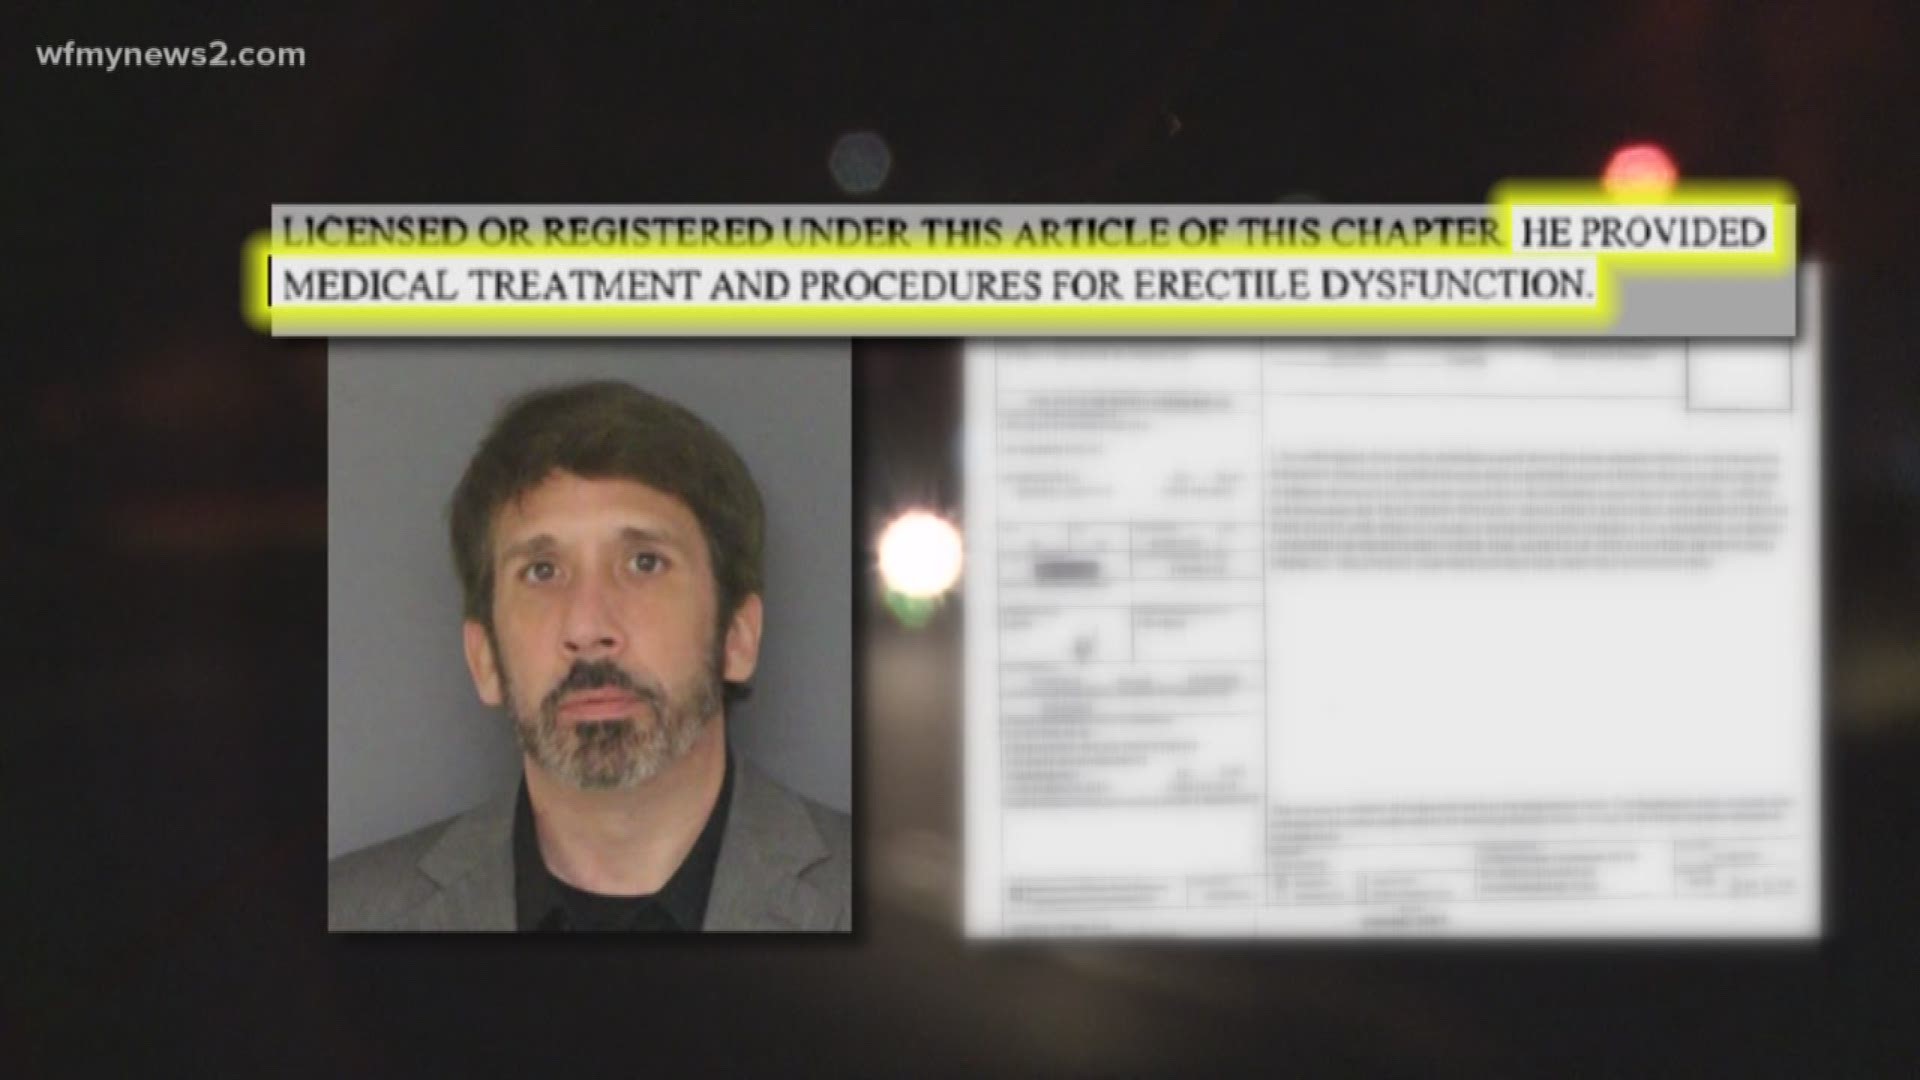 Court documents say he provided medical treatment and procedures for erectile dysfunction.